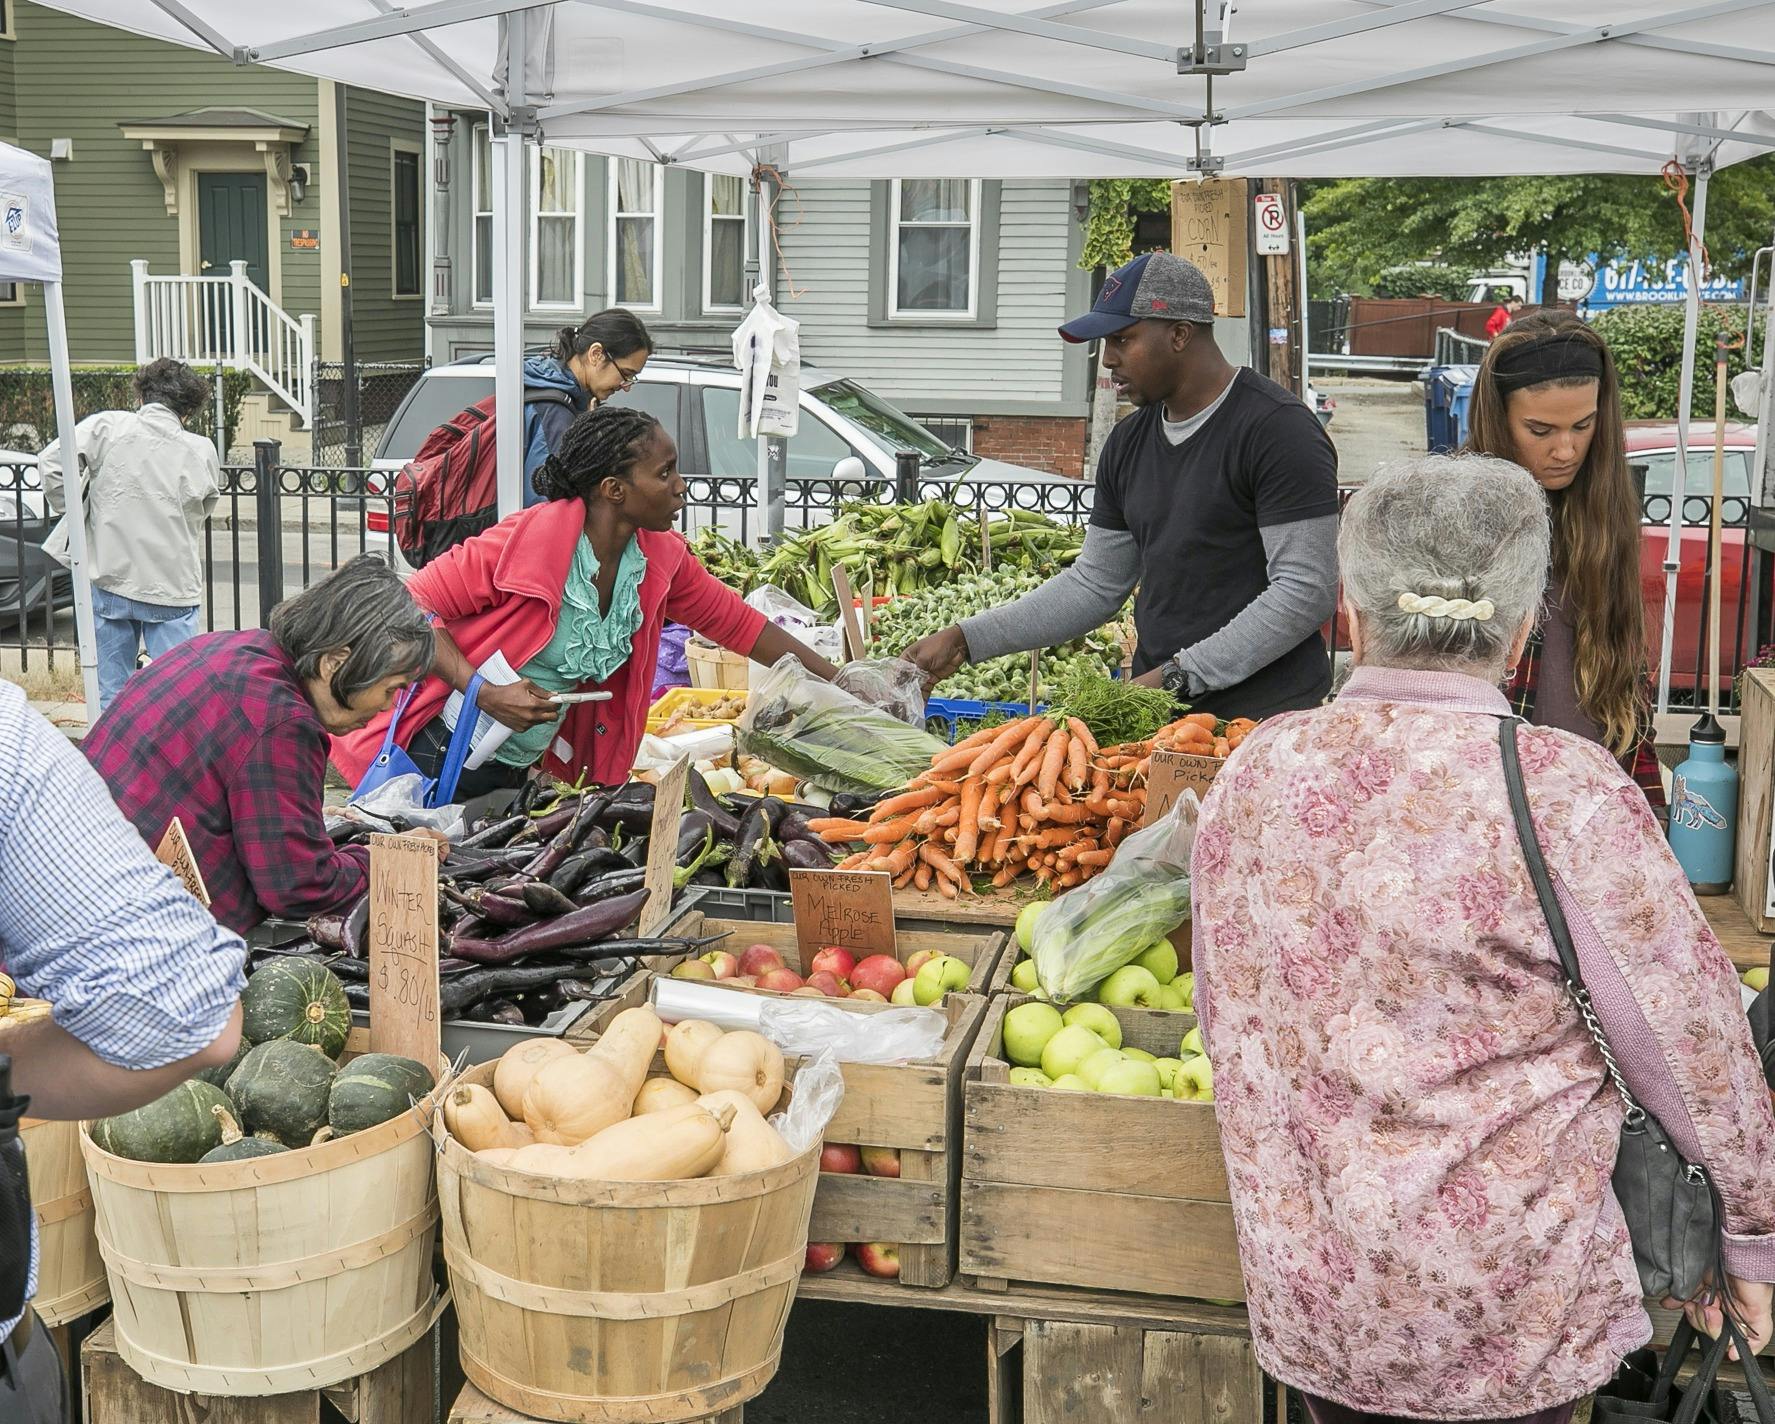 People are looking at vegetables at a farmers market